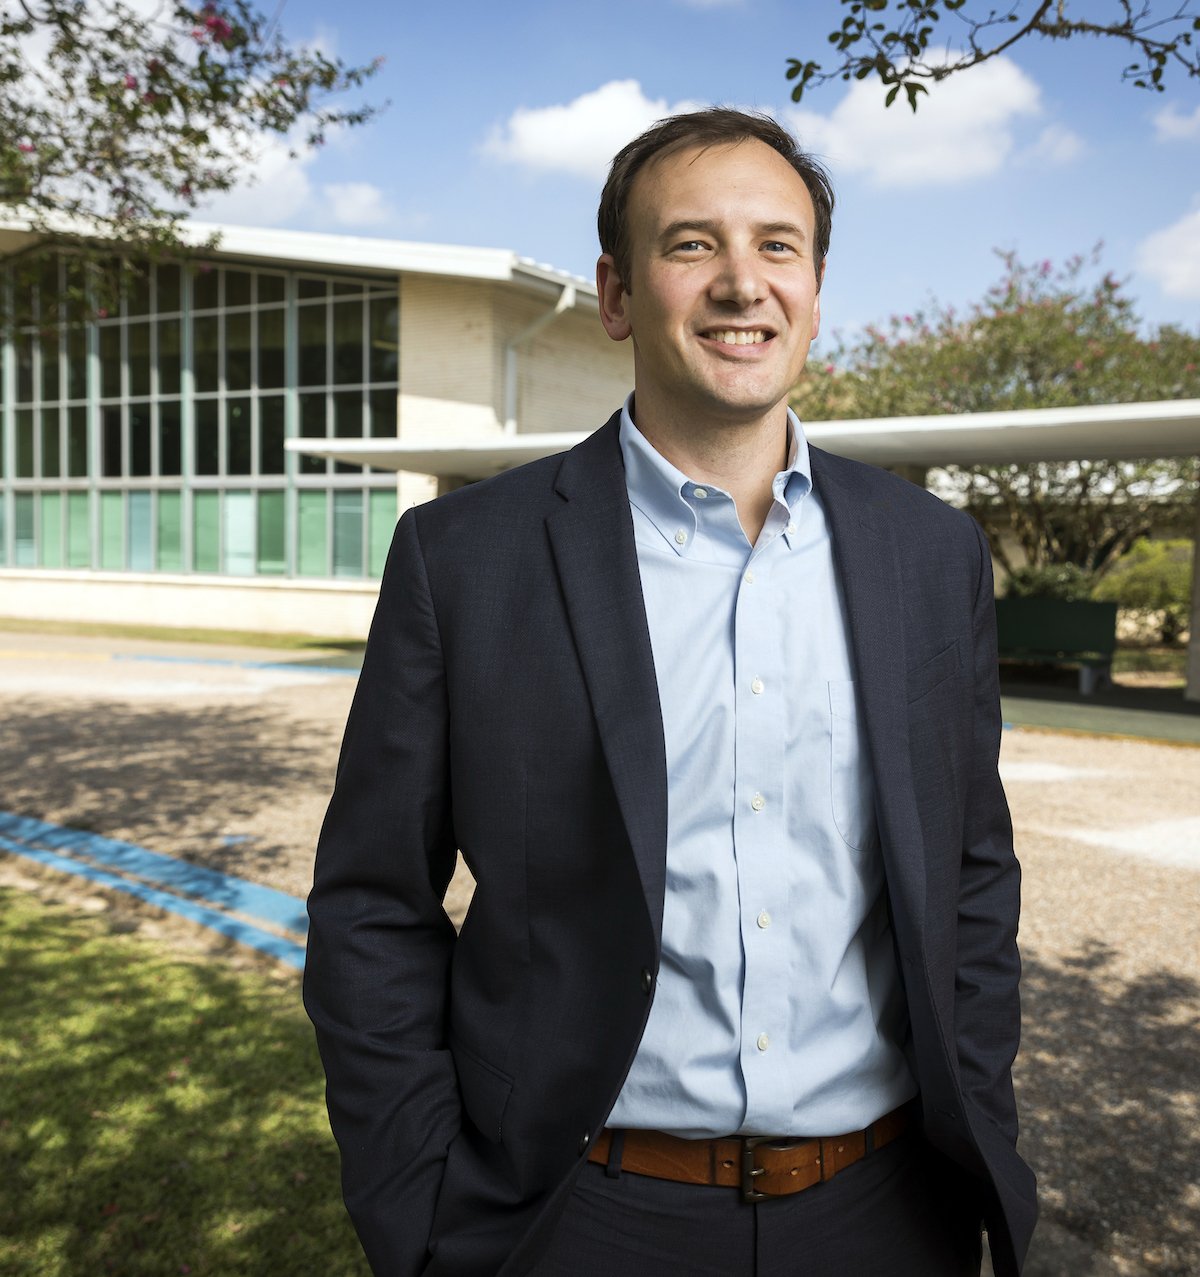 Meet Chris Meyer, the new CEO of the Baton Rouge Area Foundation